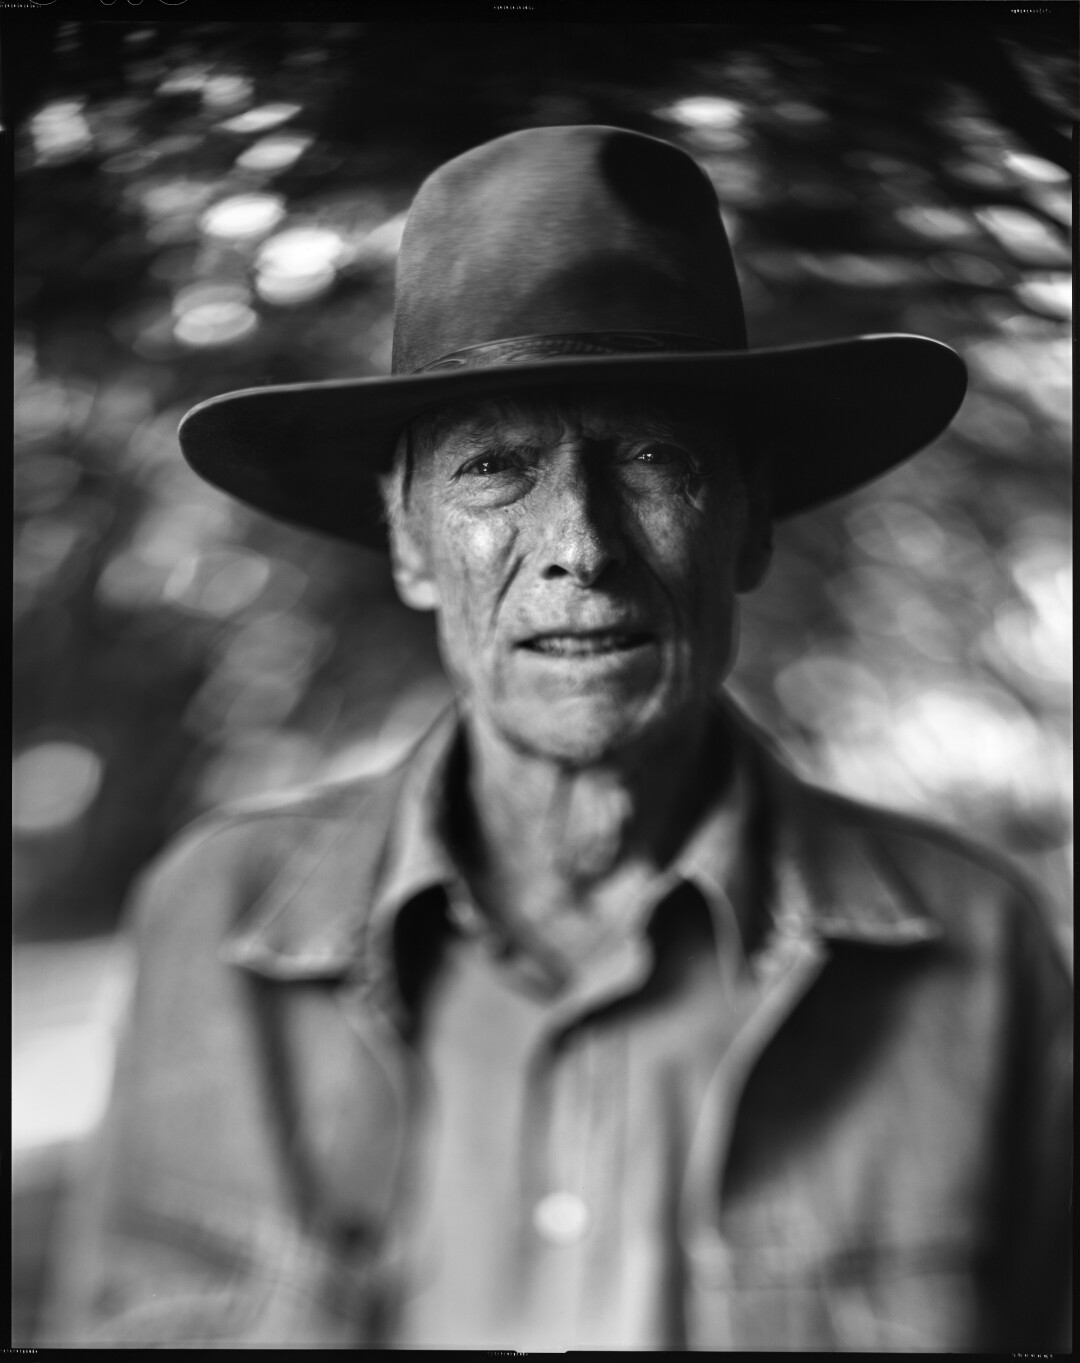 Sept. 2: Clint Eastwood in a black-and-white photo in a hat and jacket